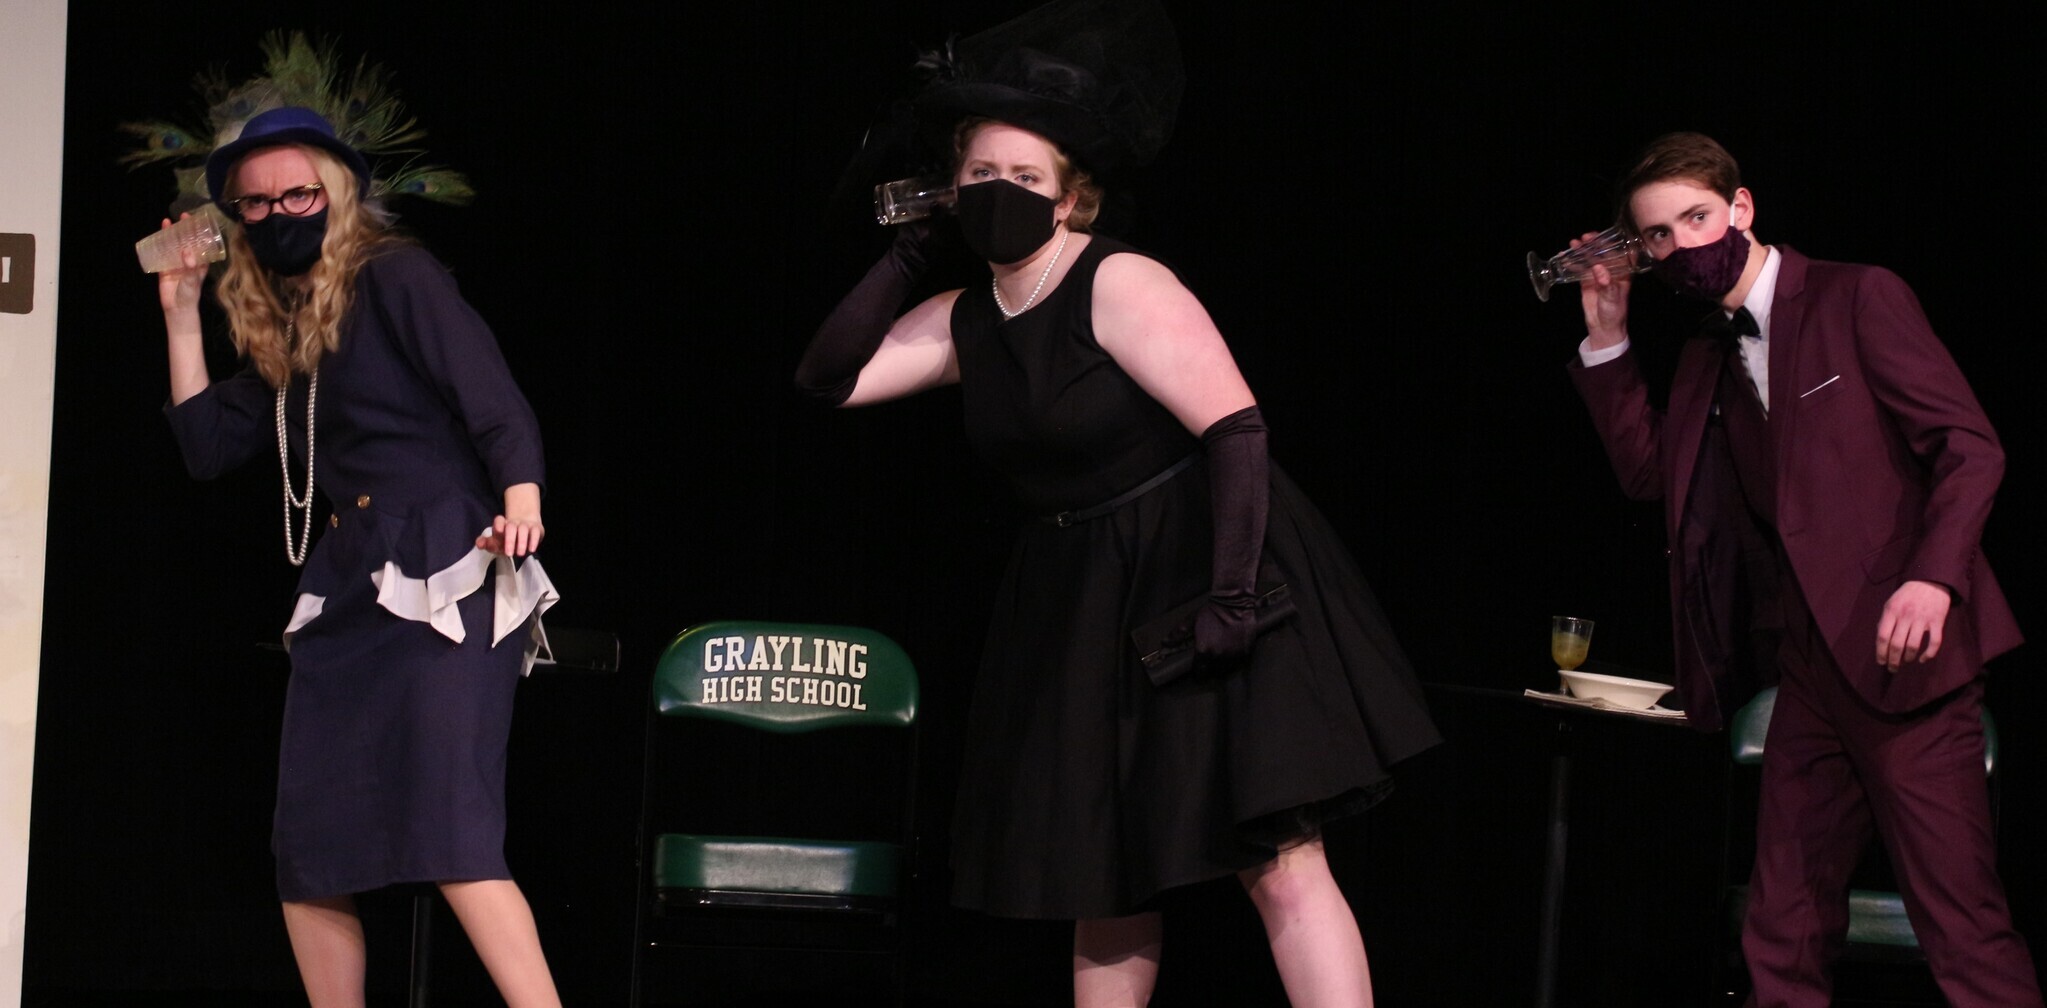 3 students as "clue" characters on stage